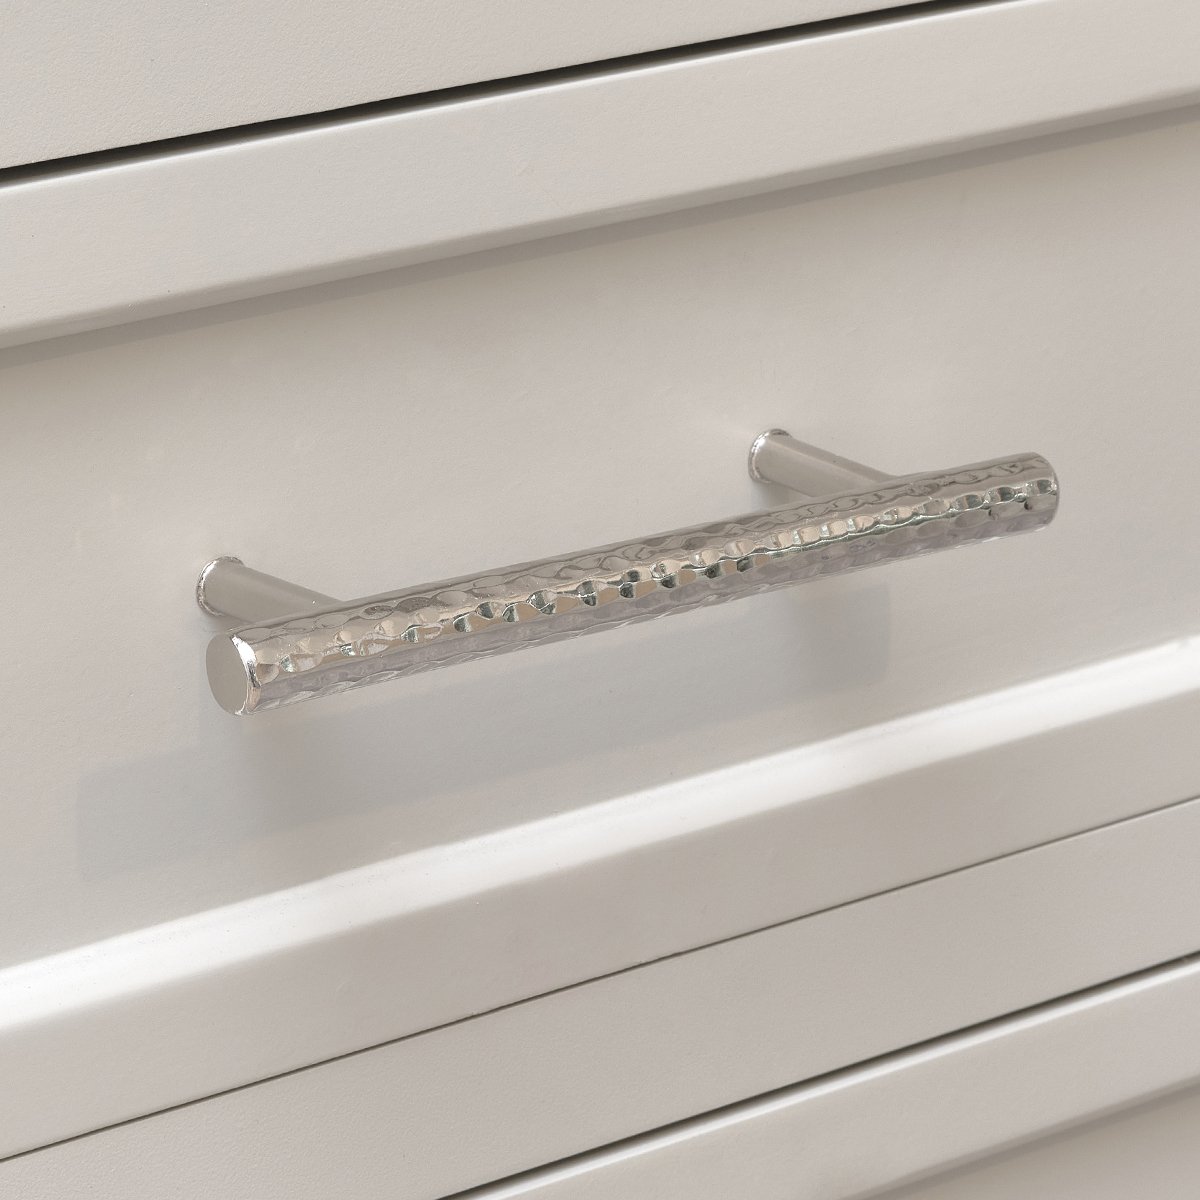 Silver Metal Hammered Bar Pull Drawer Handle 